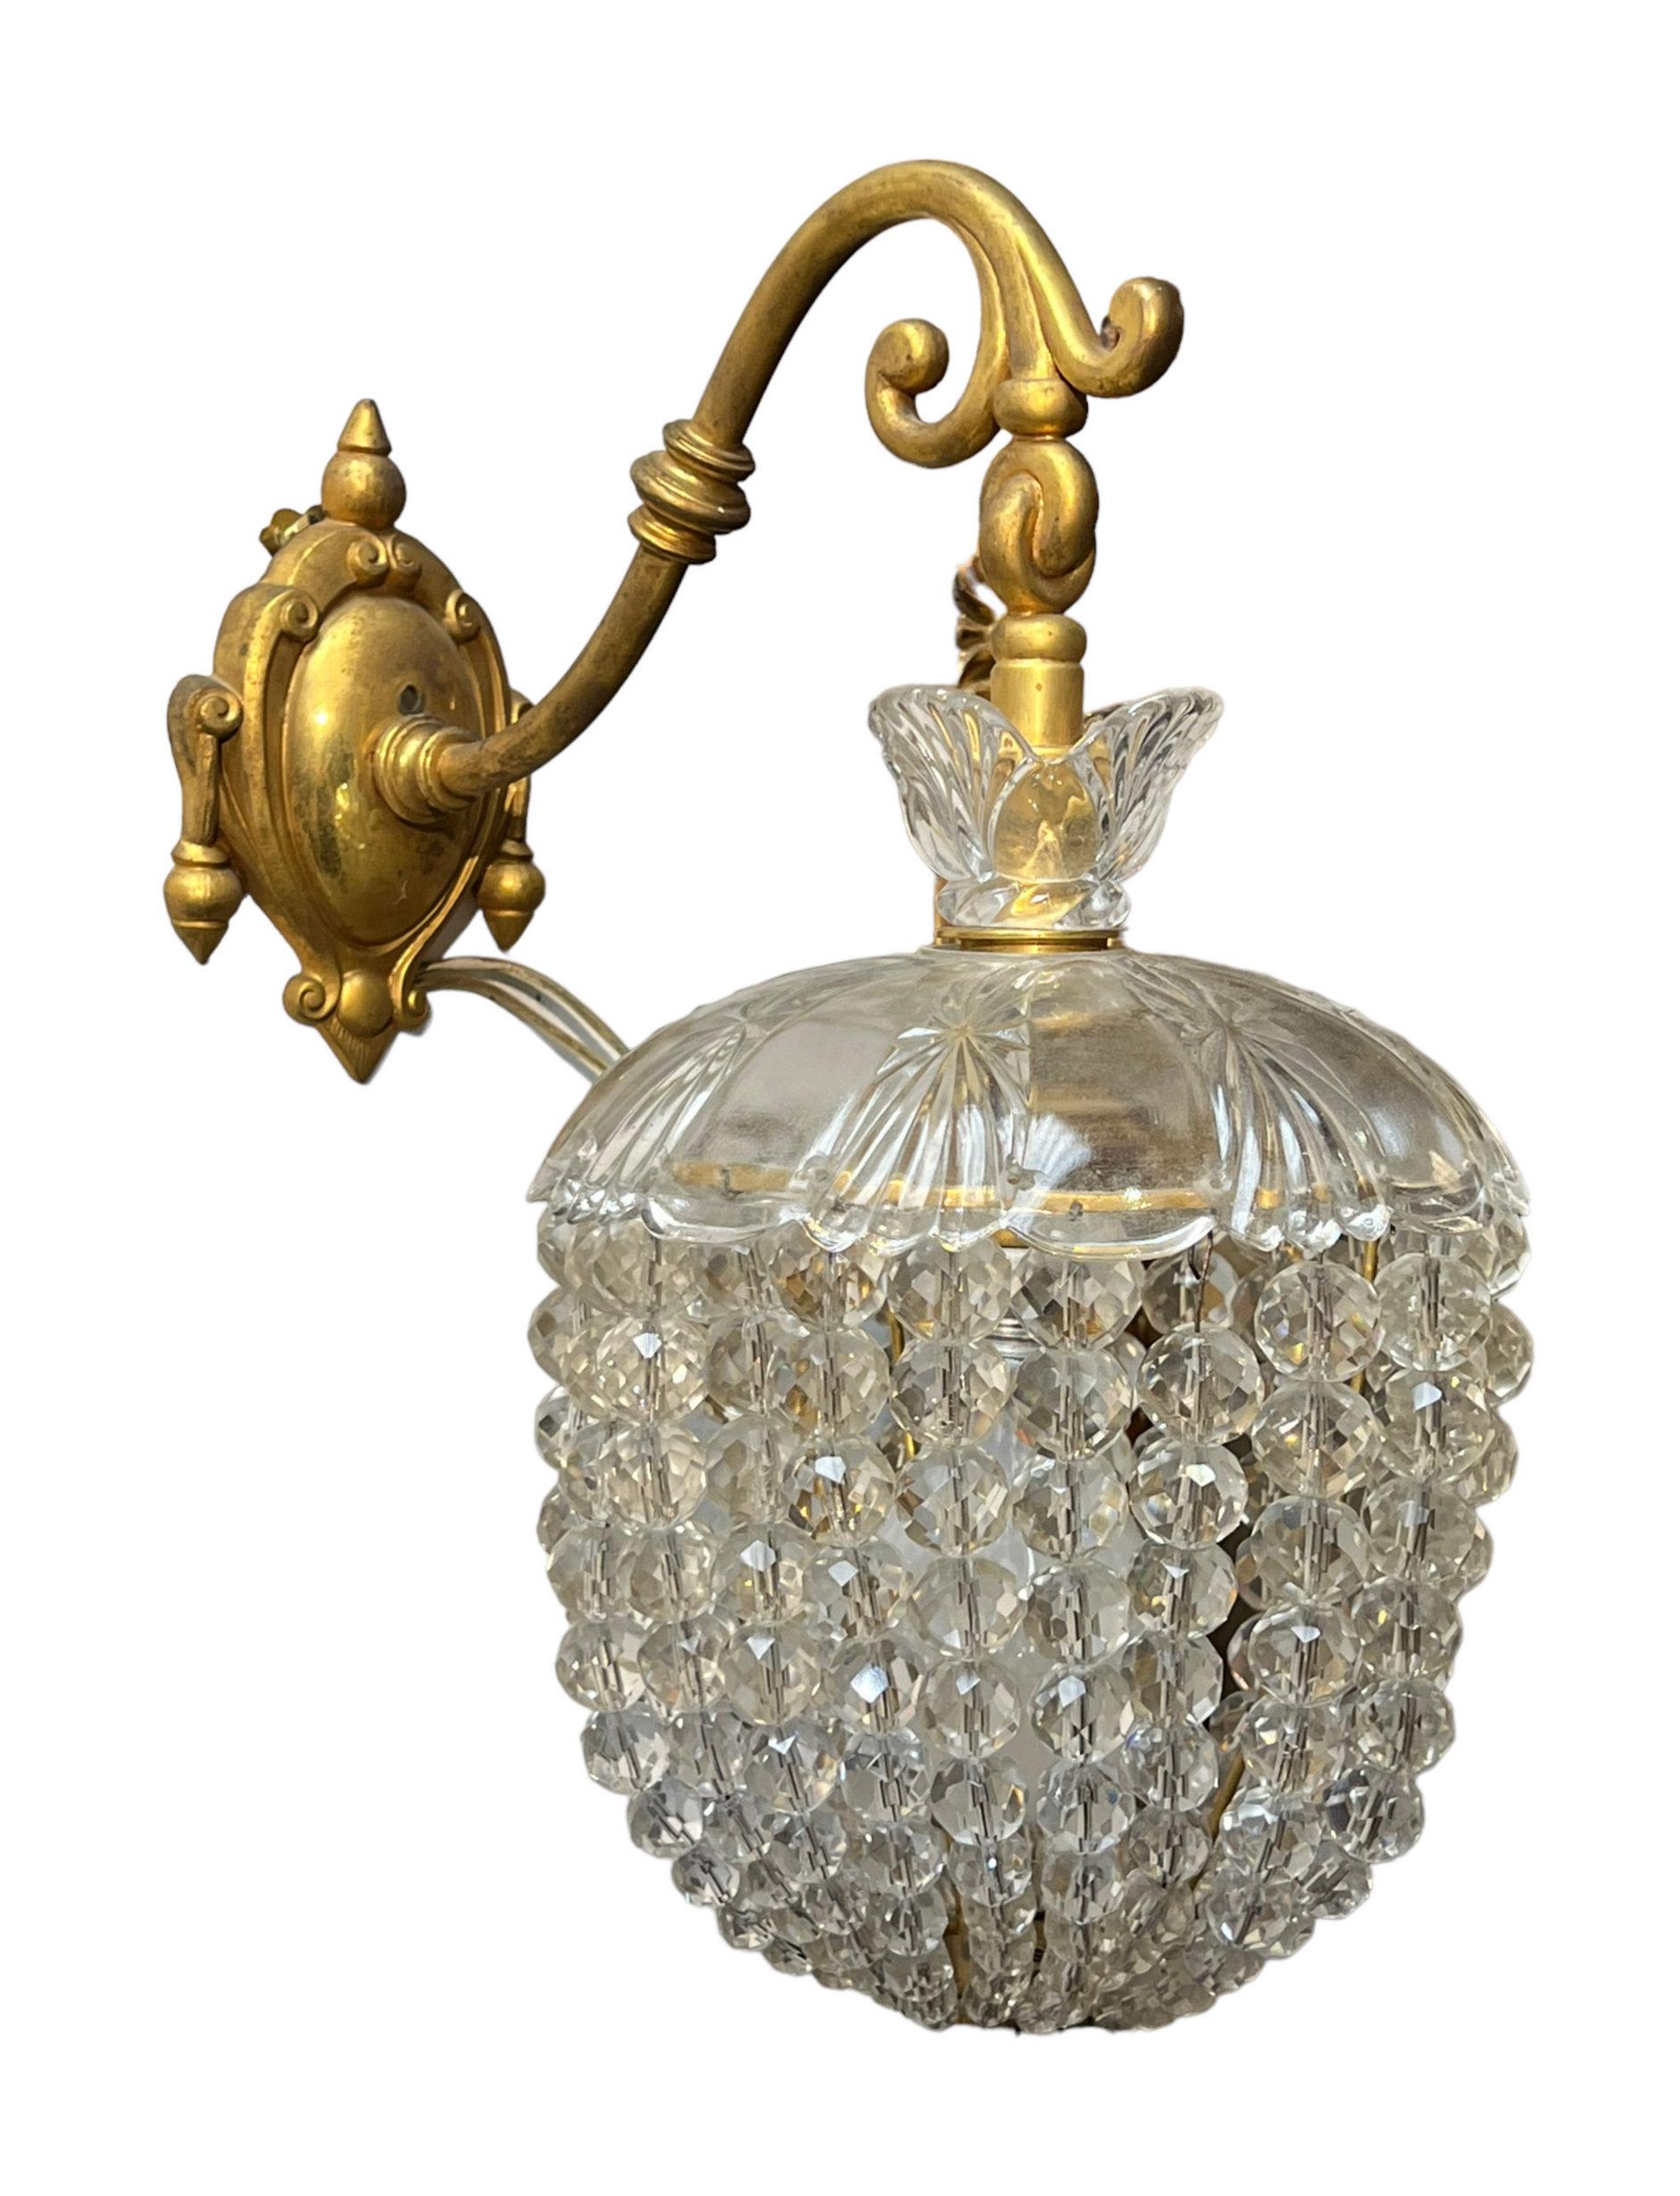 Our pair of gilt bronze sconces, circa 1900, have a single socket with canopy of spherical cut crystals and molded glass cover at top. Attributed to Baccarat.